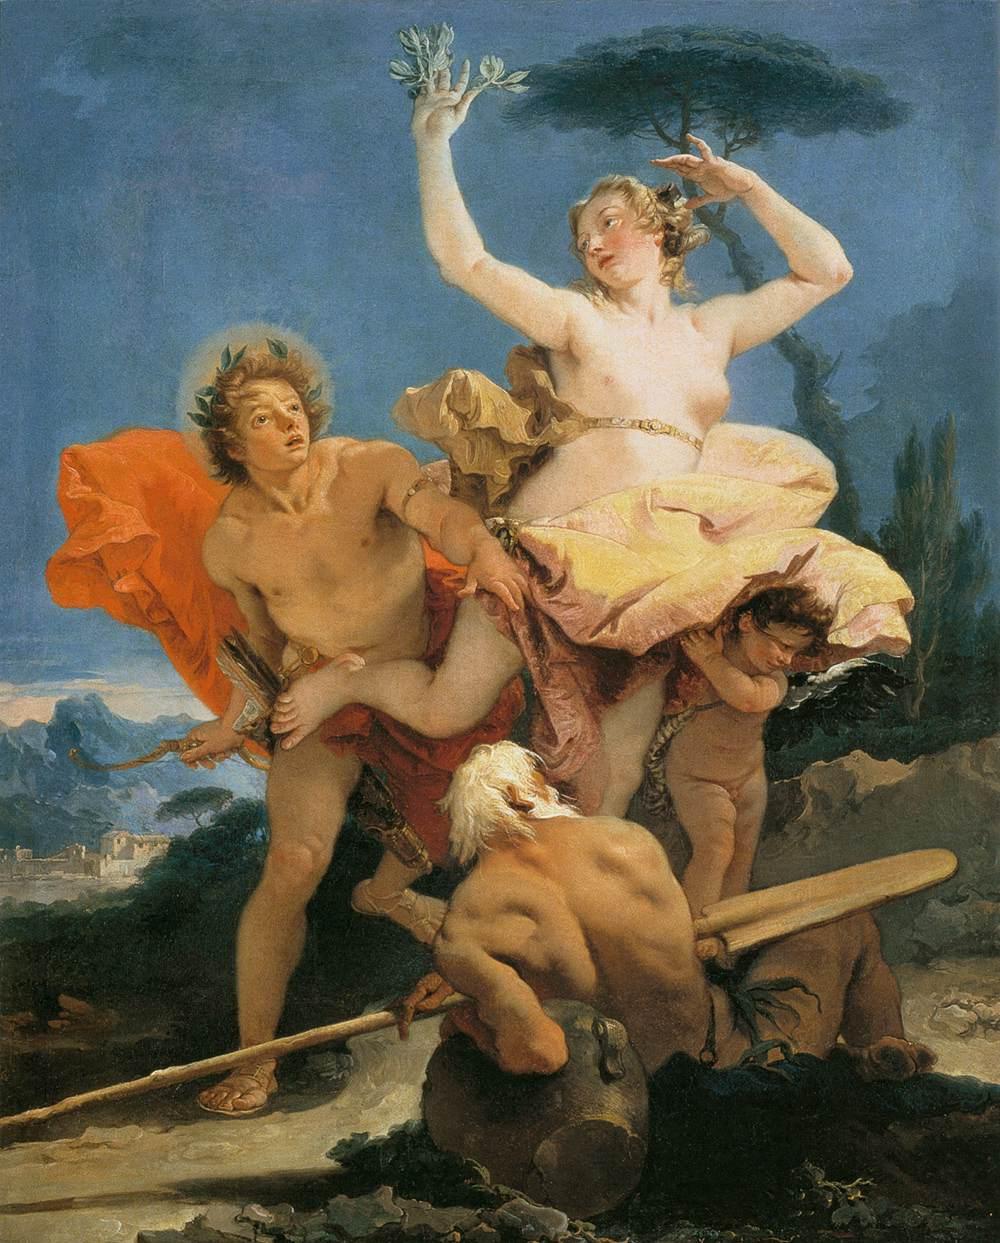 <span data-sheets-value="{"1":2,"2":"The figures of Eros and Daphne’s father, the river god Peneus, are included in this painting. “Apollo and Daphn,” circa 1743, by Giovanni Battista Tiepolo. Louvre Museum. (Public Domain)"}" data-sheets-userformat="{"2":15107,"3":{"1":0},"4":{"1":2,"2":16316922},"11":4,"12":0,"14":{"1":2,"2":2236962},"15":"Times New Roman","16":12}">The figures of Eros and Daphne’s father, the river god Peneus, are included in this painting. “Apollo and Daphne,” circa 1743, by Giovanni Battista Tiepolo. Louvre Museum. (Public Domain)</span>